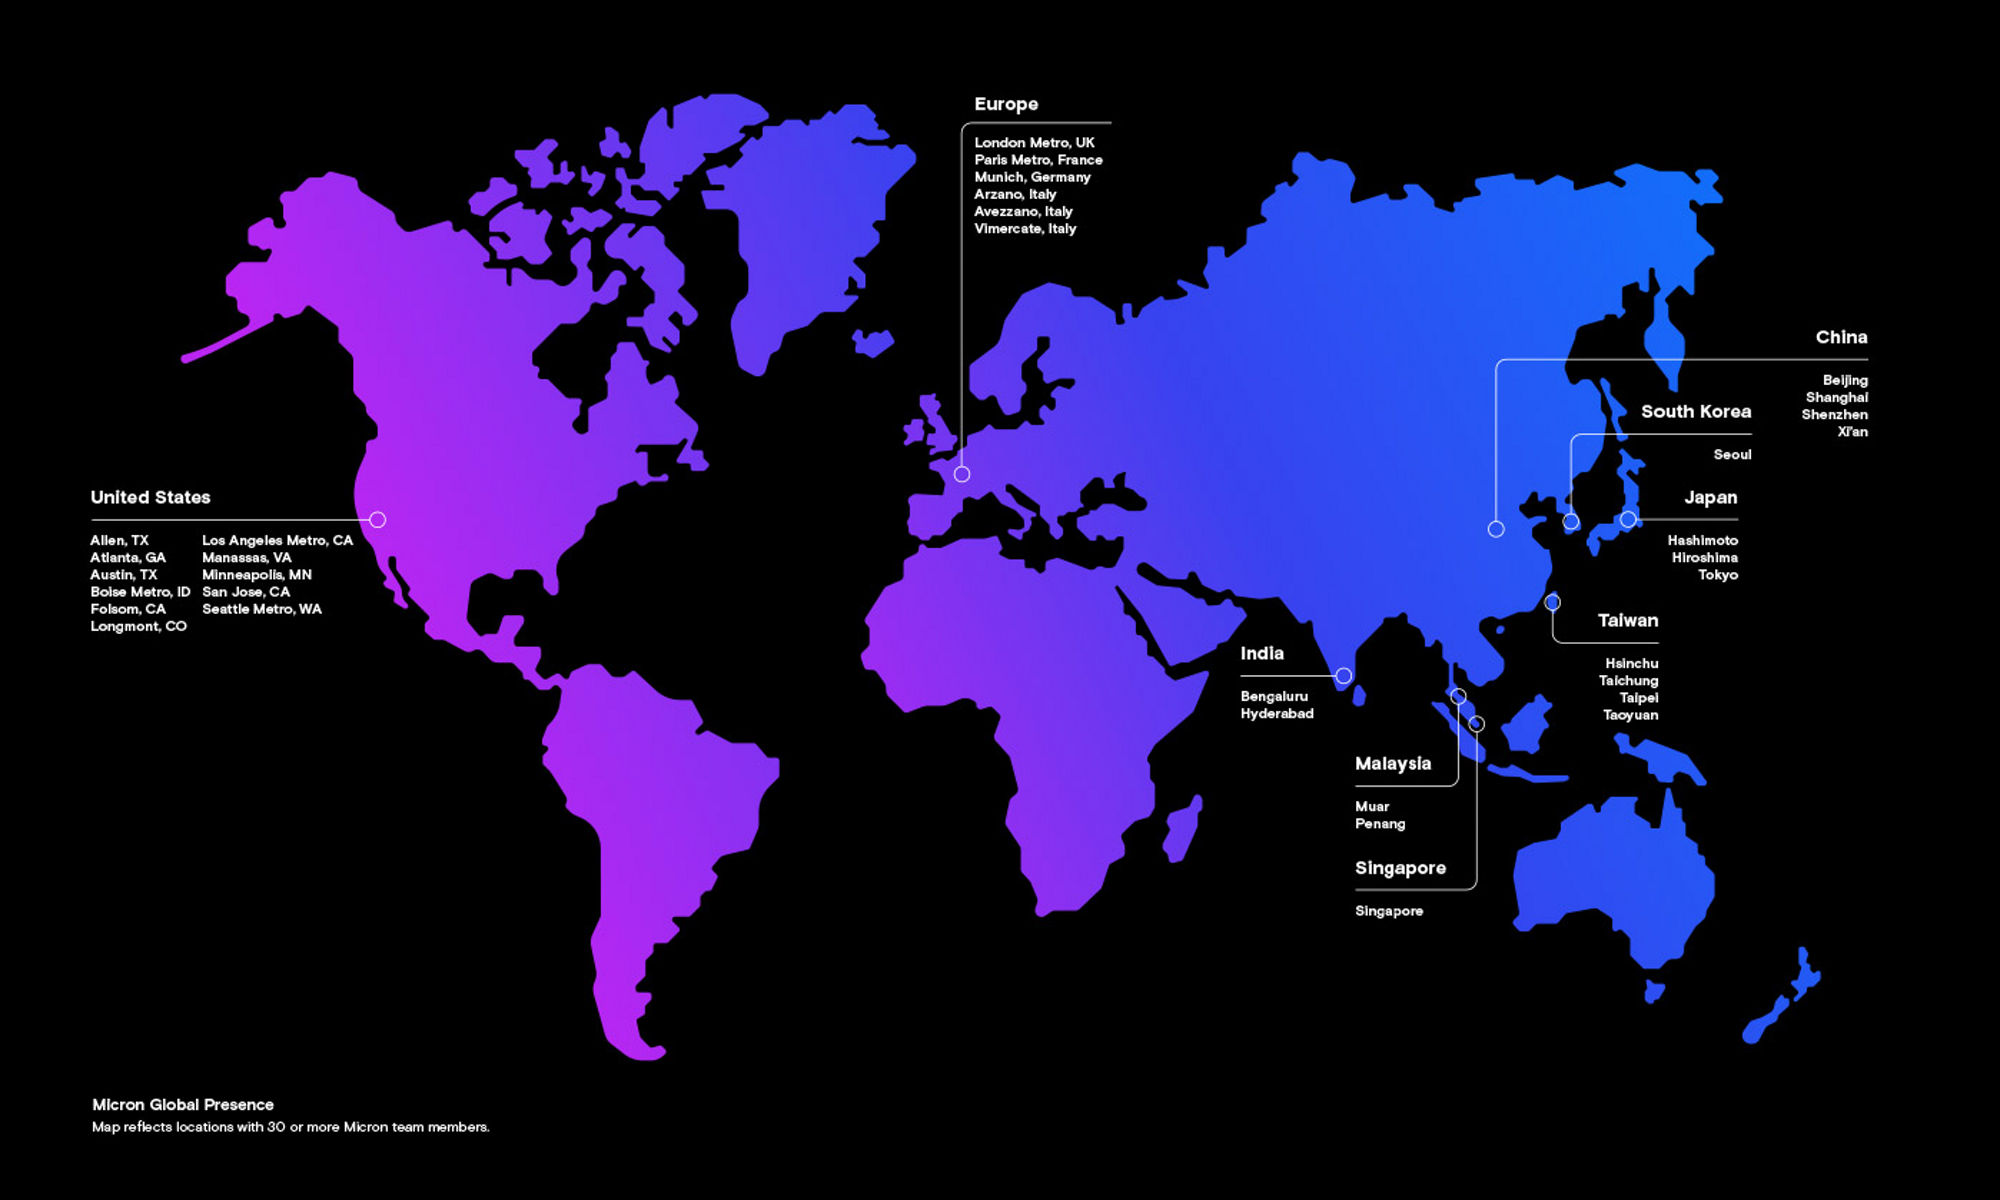 Map of continents shaded in purple and blue